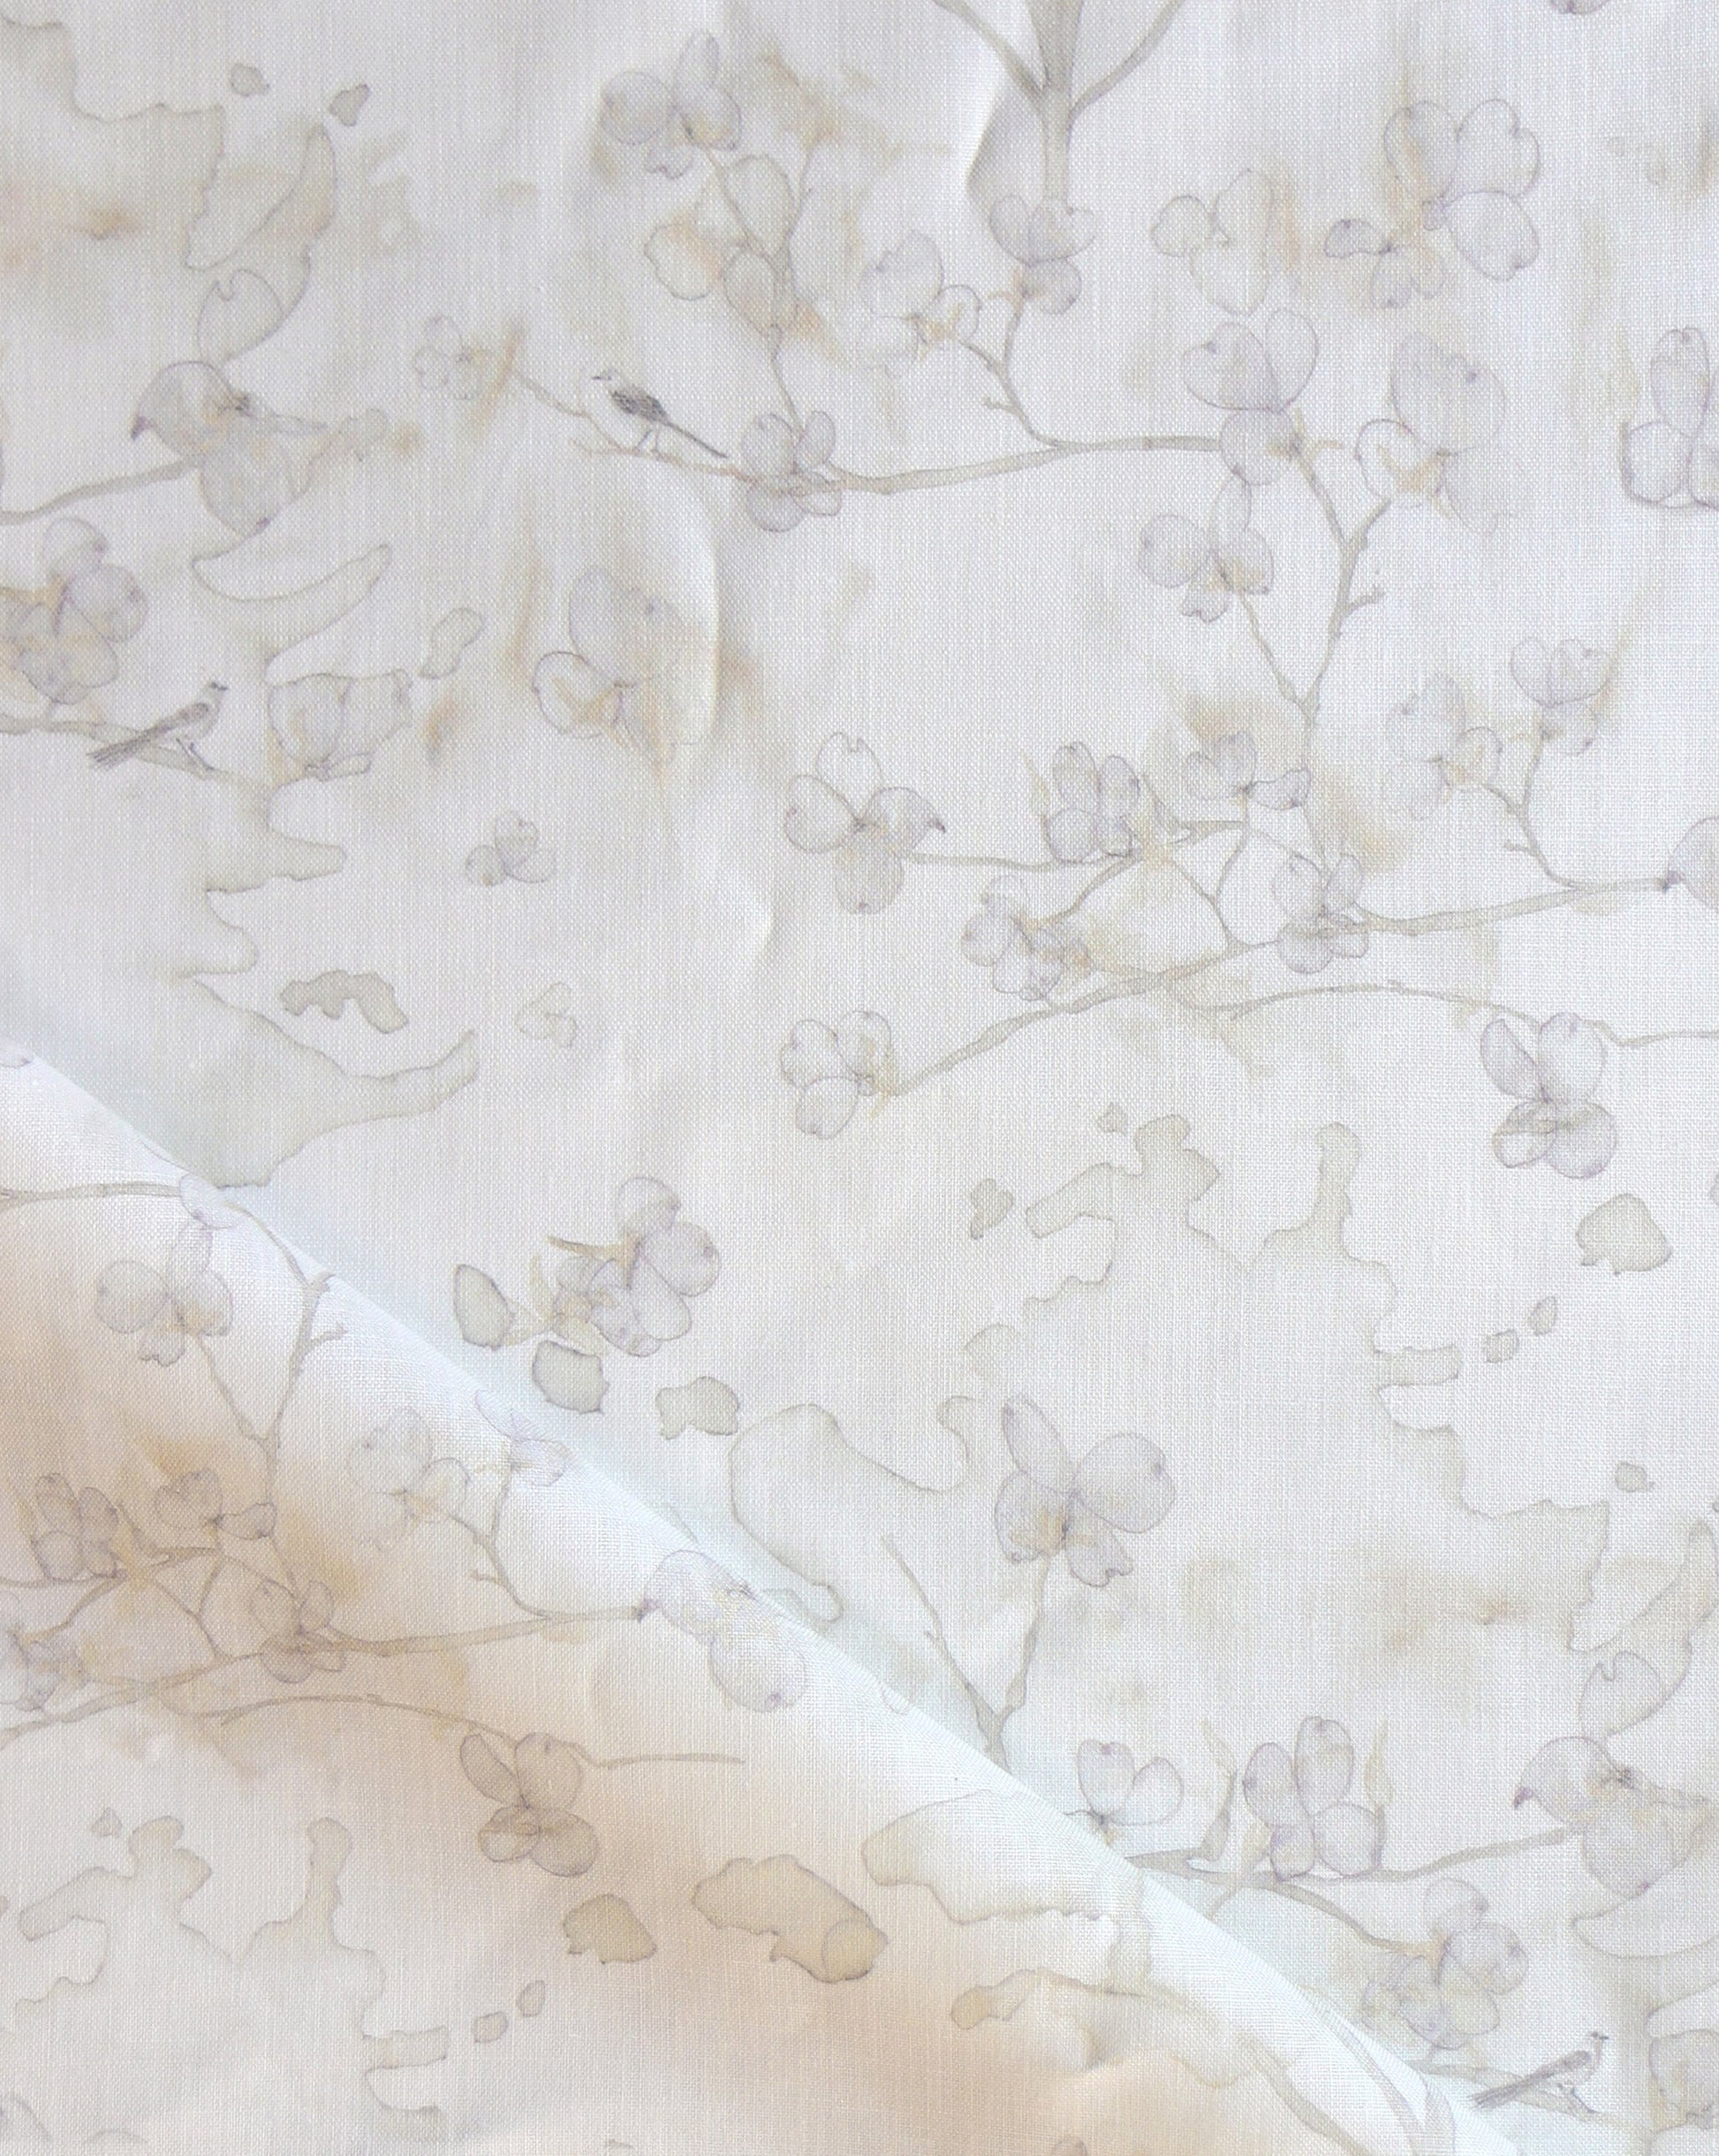 Dogwood Dreams is a watery pen-and-ink design. As luxury fabric, Flax provides a colorway of beige.